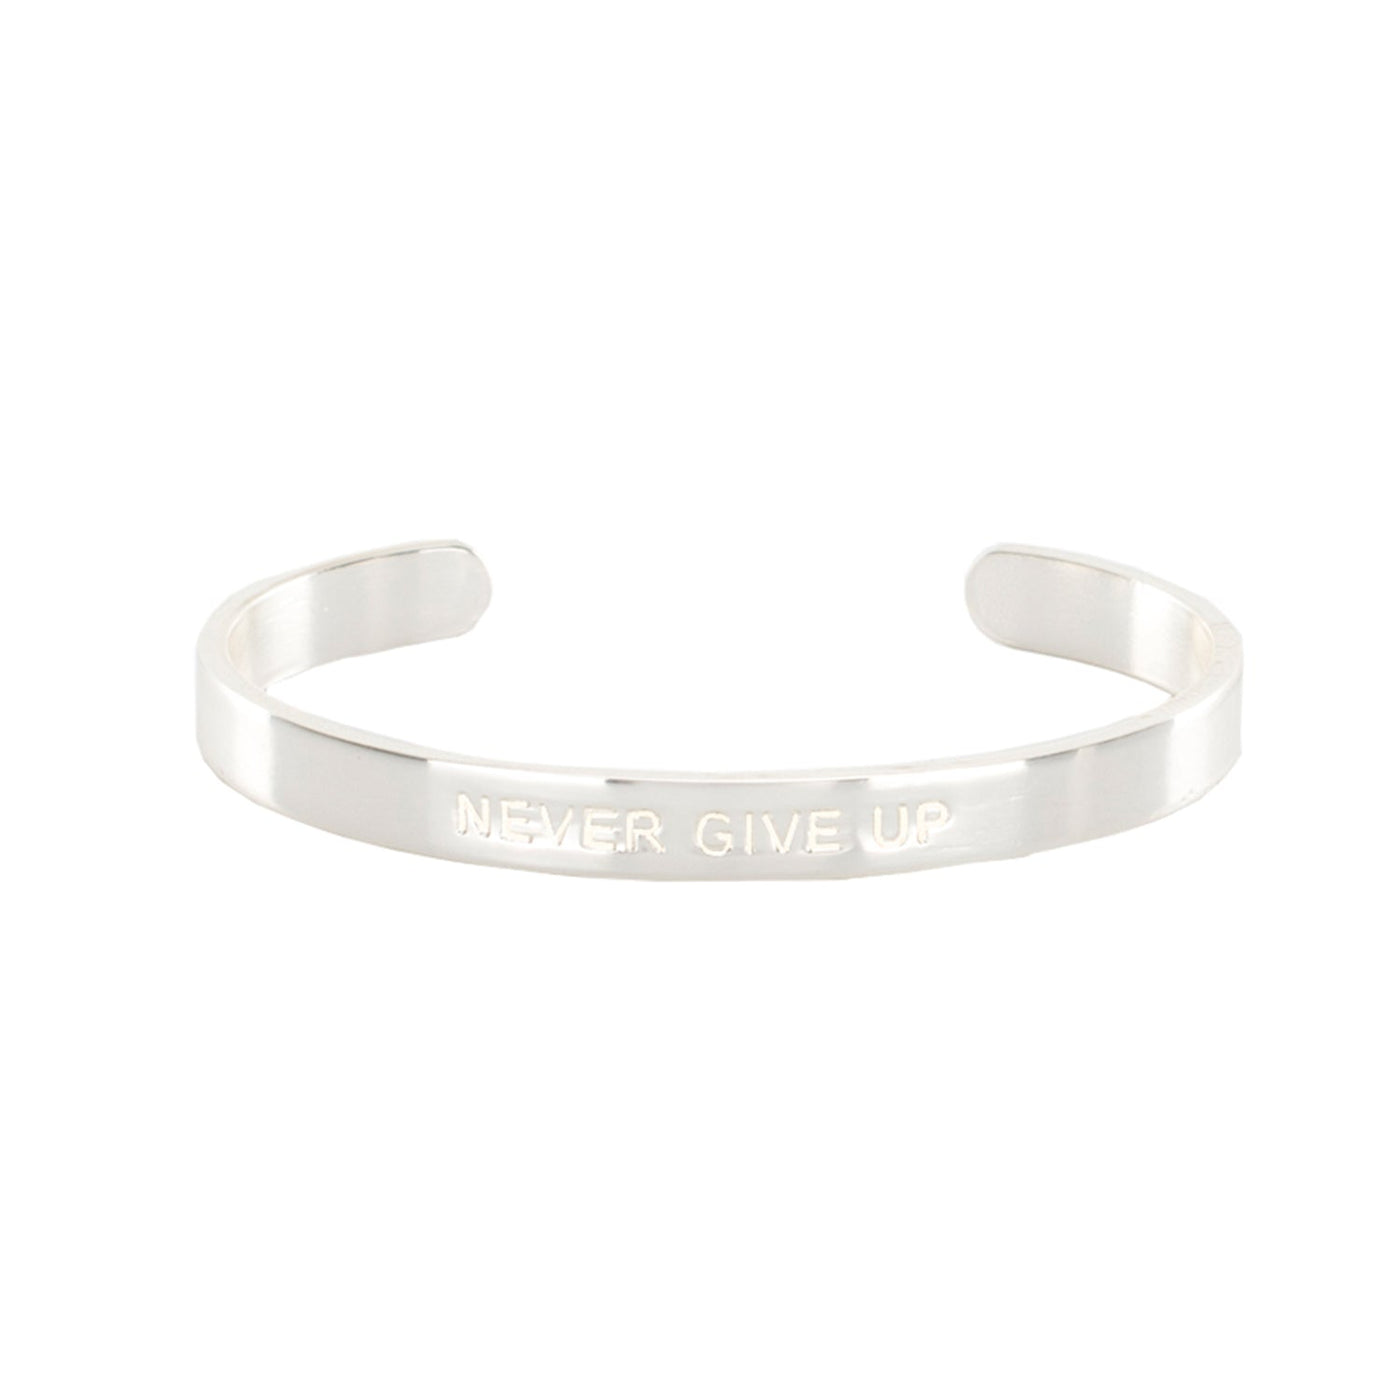 +Engraved Quote .25 - Never Give Up - Silver